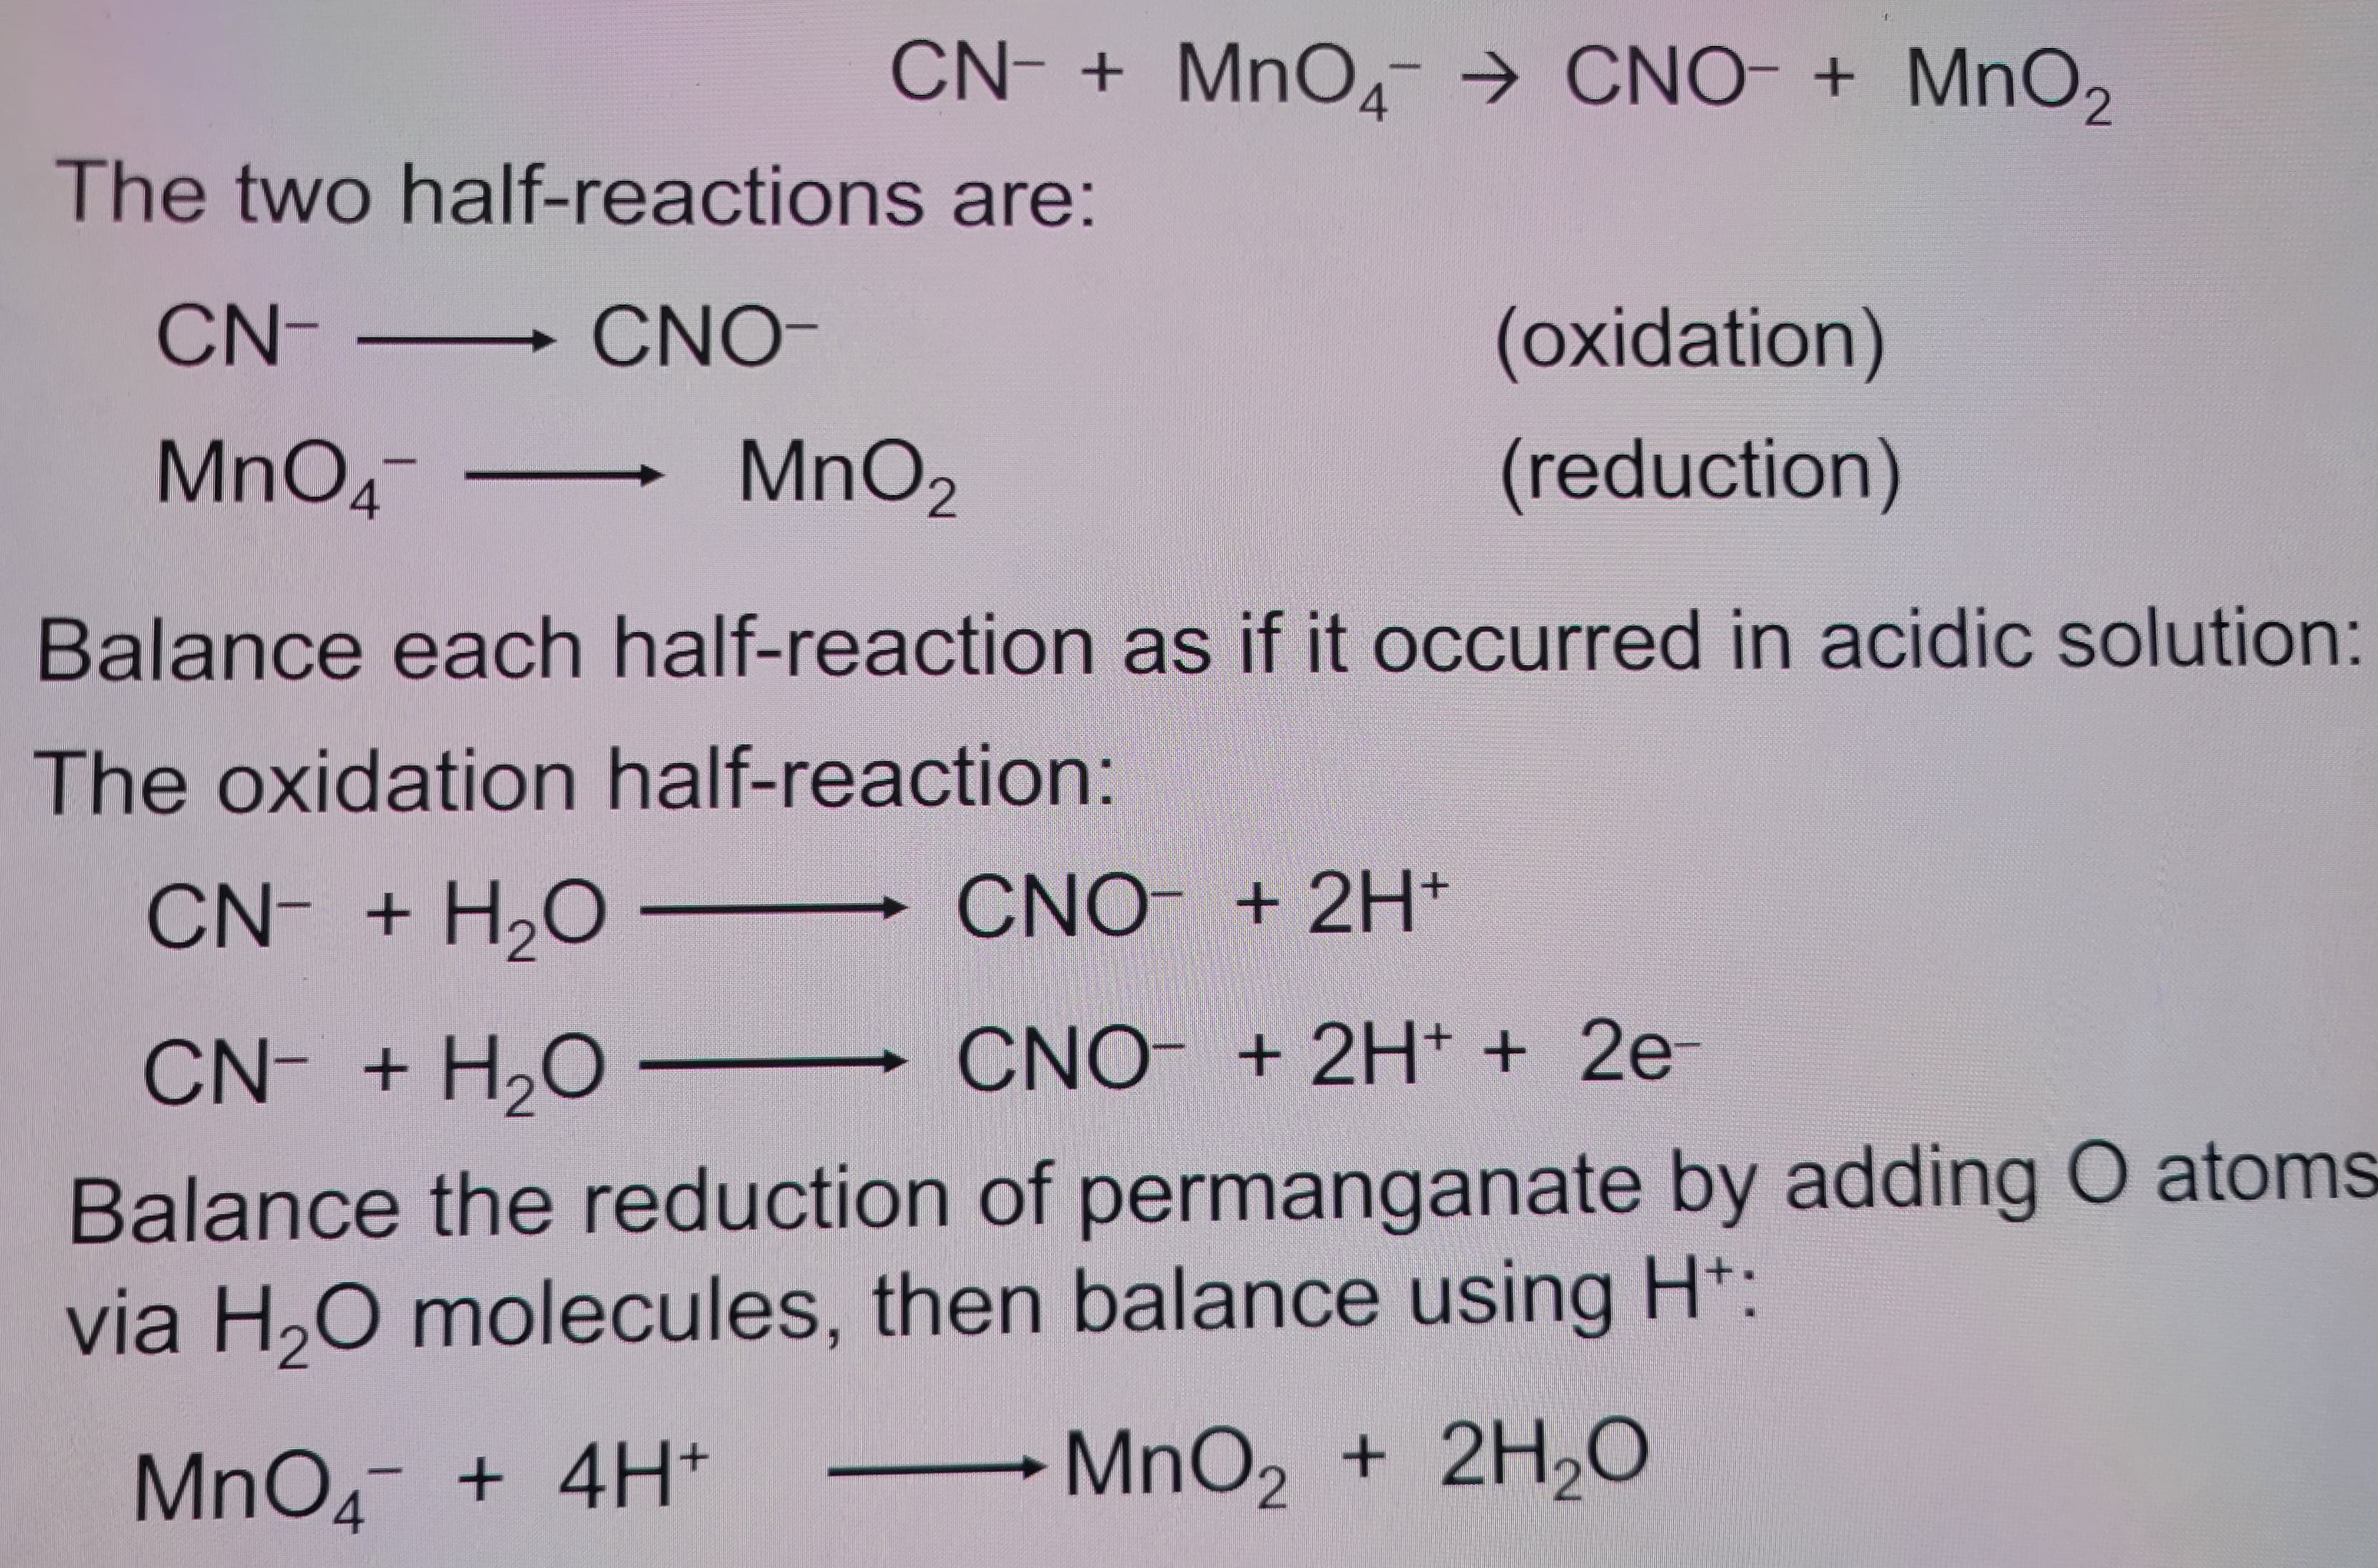 CN + MnO CNO + MnO2
The two half-reactions are:
CN-
CNO-
MnO4¯
MnO2
(oxidation)
(reduction)
Balance each half-reaction as if it occurred in acidic solution:
The oxidation half-reaction:
CN- + H₂O
CNO + 2H+
CN- + H₂O - CNO + 2H+ + 2e-
Balance the reduction of permanganate by adding O atoms
via H₂O molecules, then balance using H+:
MnO4 + 4H+
MnO2 + 2H2O